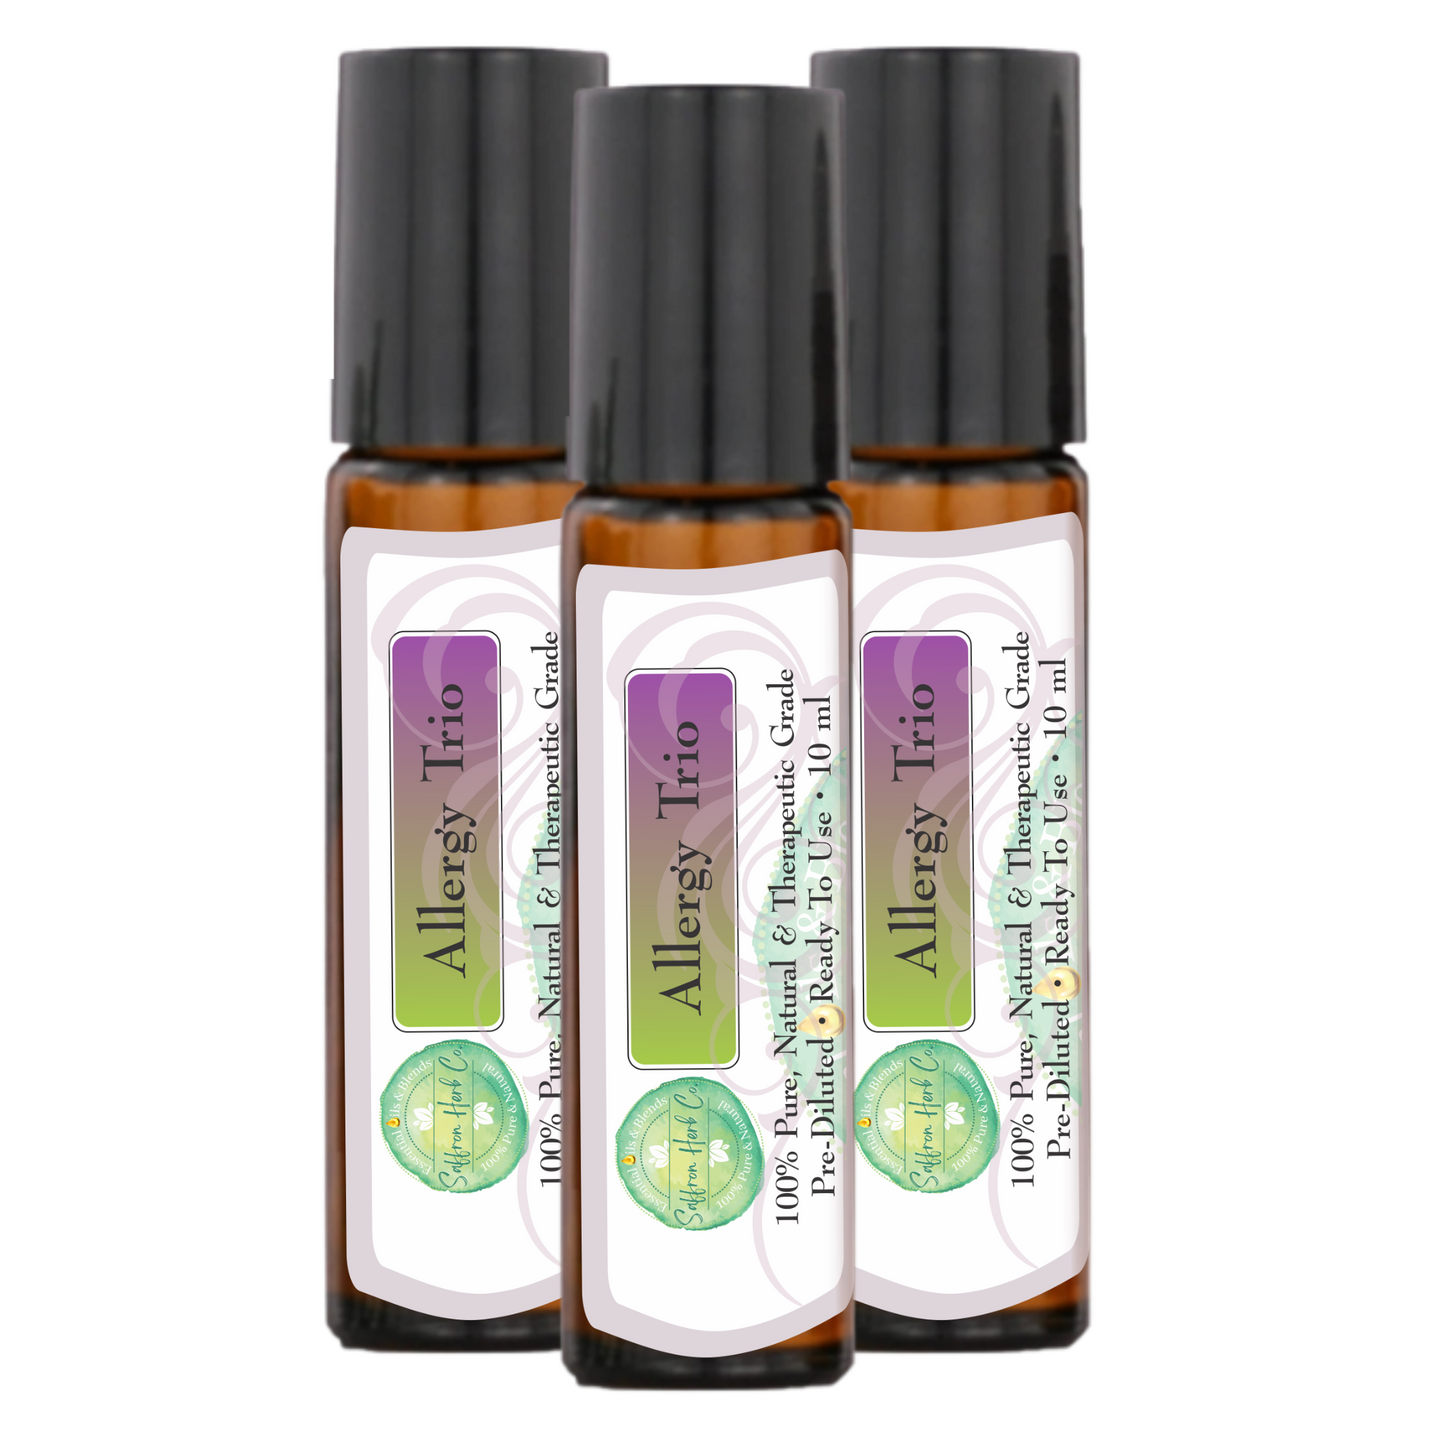 Allergy Trio™ Essential Oil Roller Bottle Blend • 100% Pure & Natural • Pre-Diluted • Ready To Use